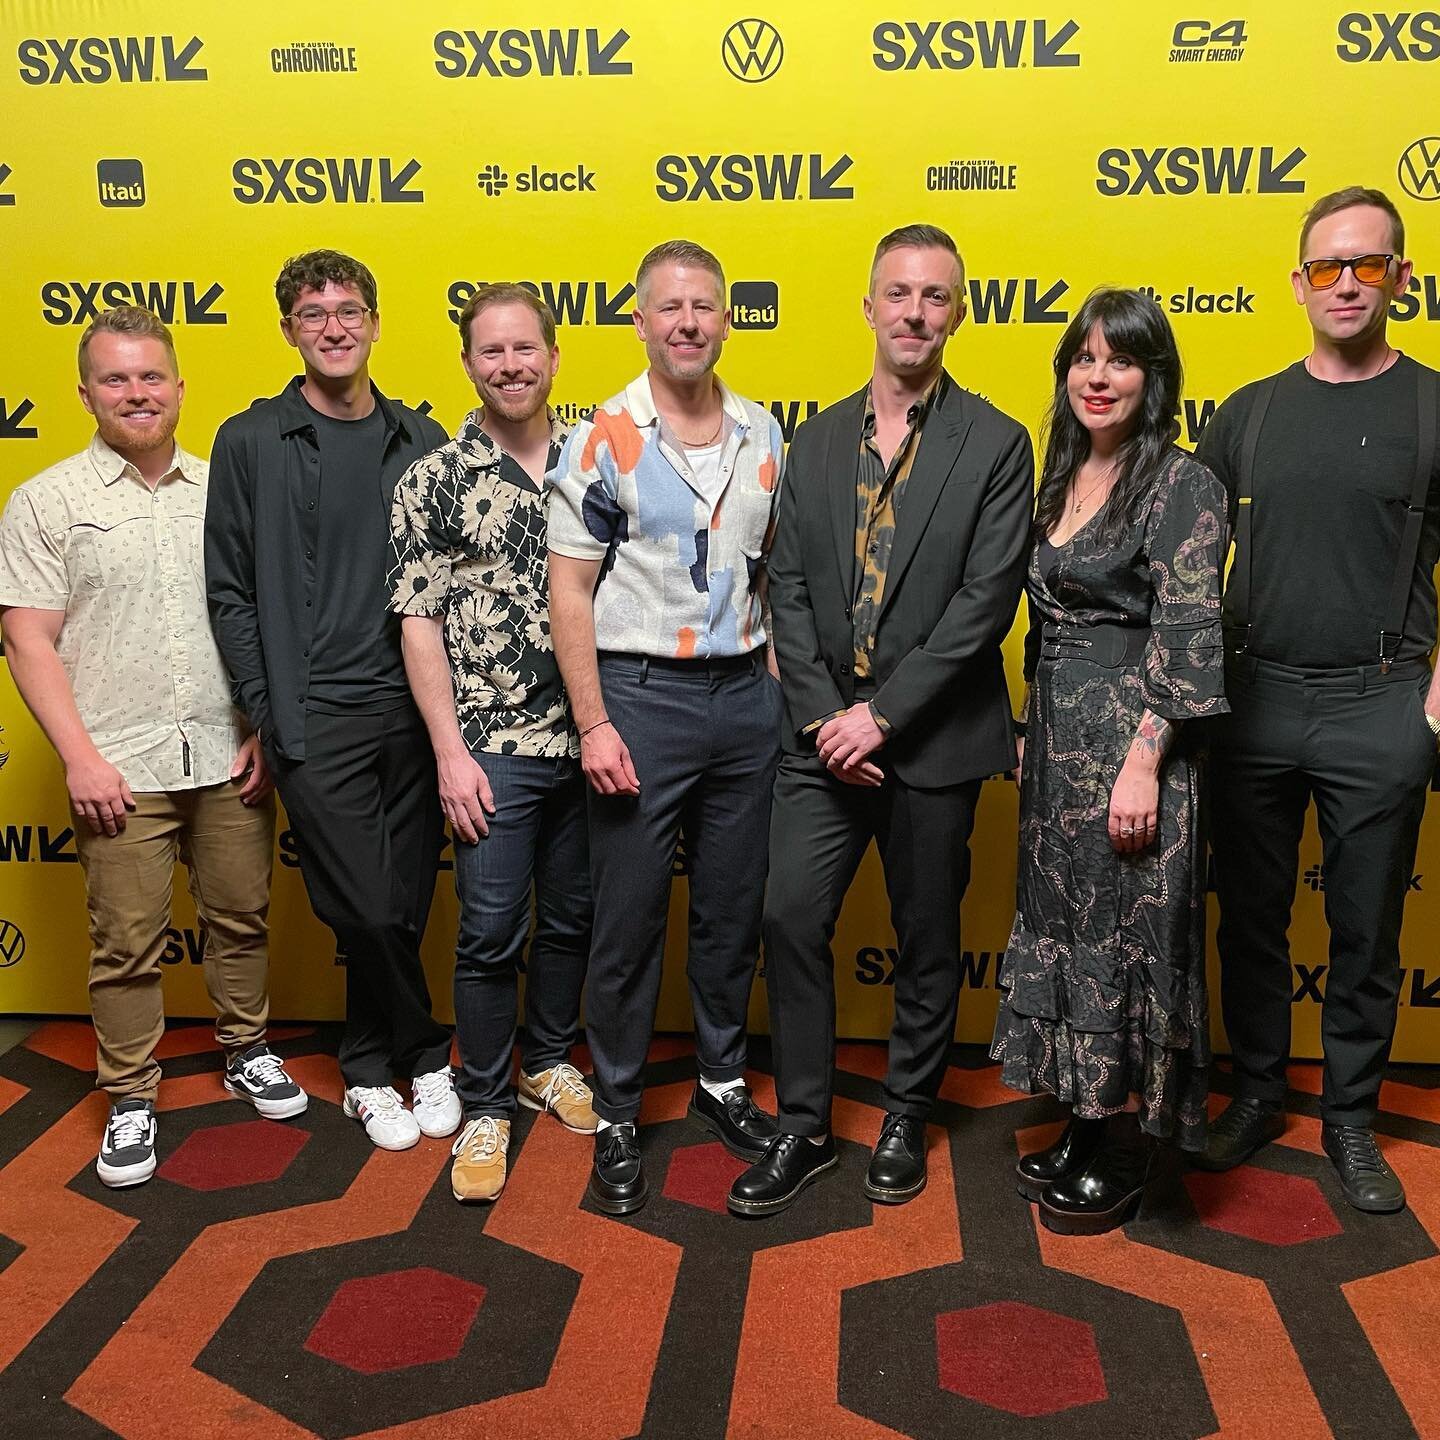 SATAN THANKS Y&rsquo;ALL! ❤️&zwj;🔥

We just wanna say thank you to the amazing programming team at @sxsw for the opportunity to screen our film at the festival. It has been a dream come true. Thanks to all the staff, volunteers and the stellar audie